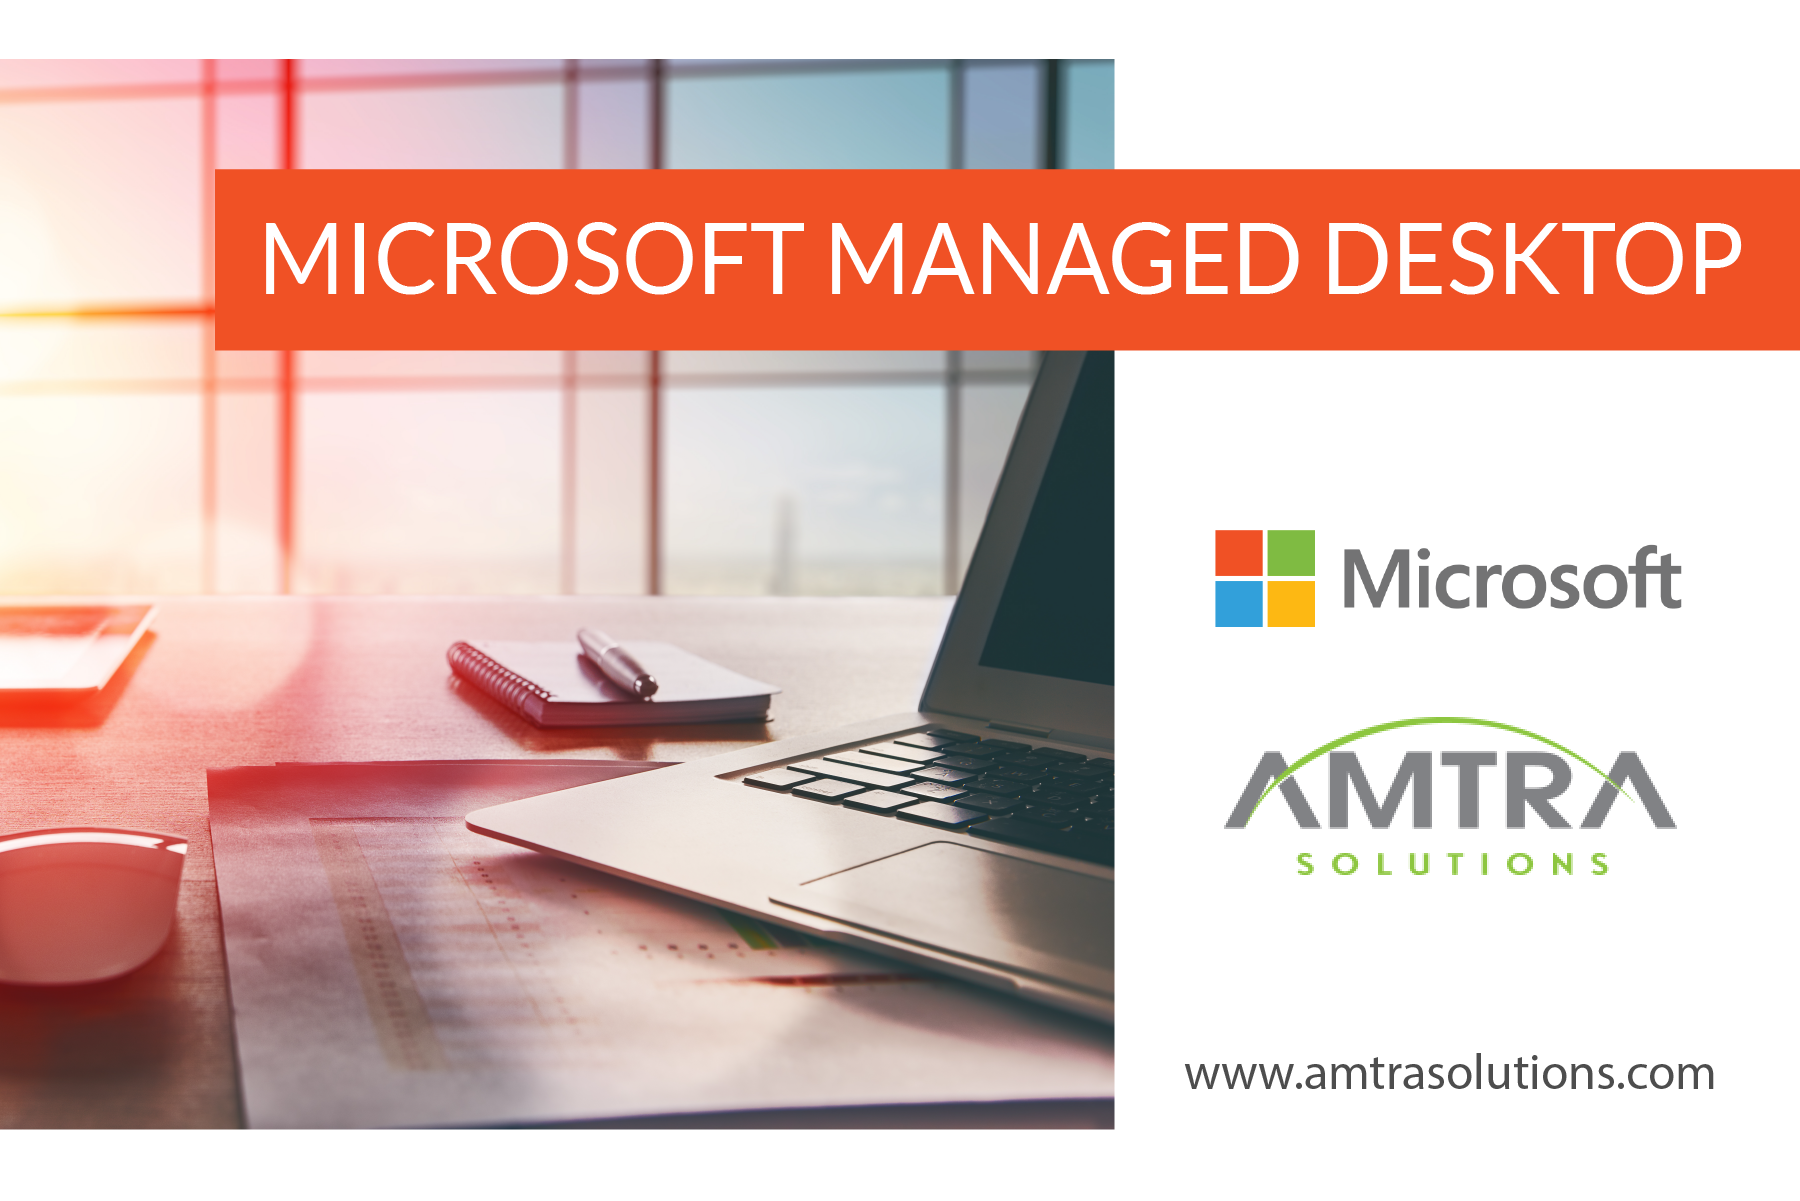 AMTRA Solutions is now an Authorized Microsoft Managed Desktop Partner